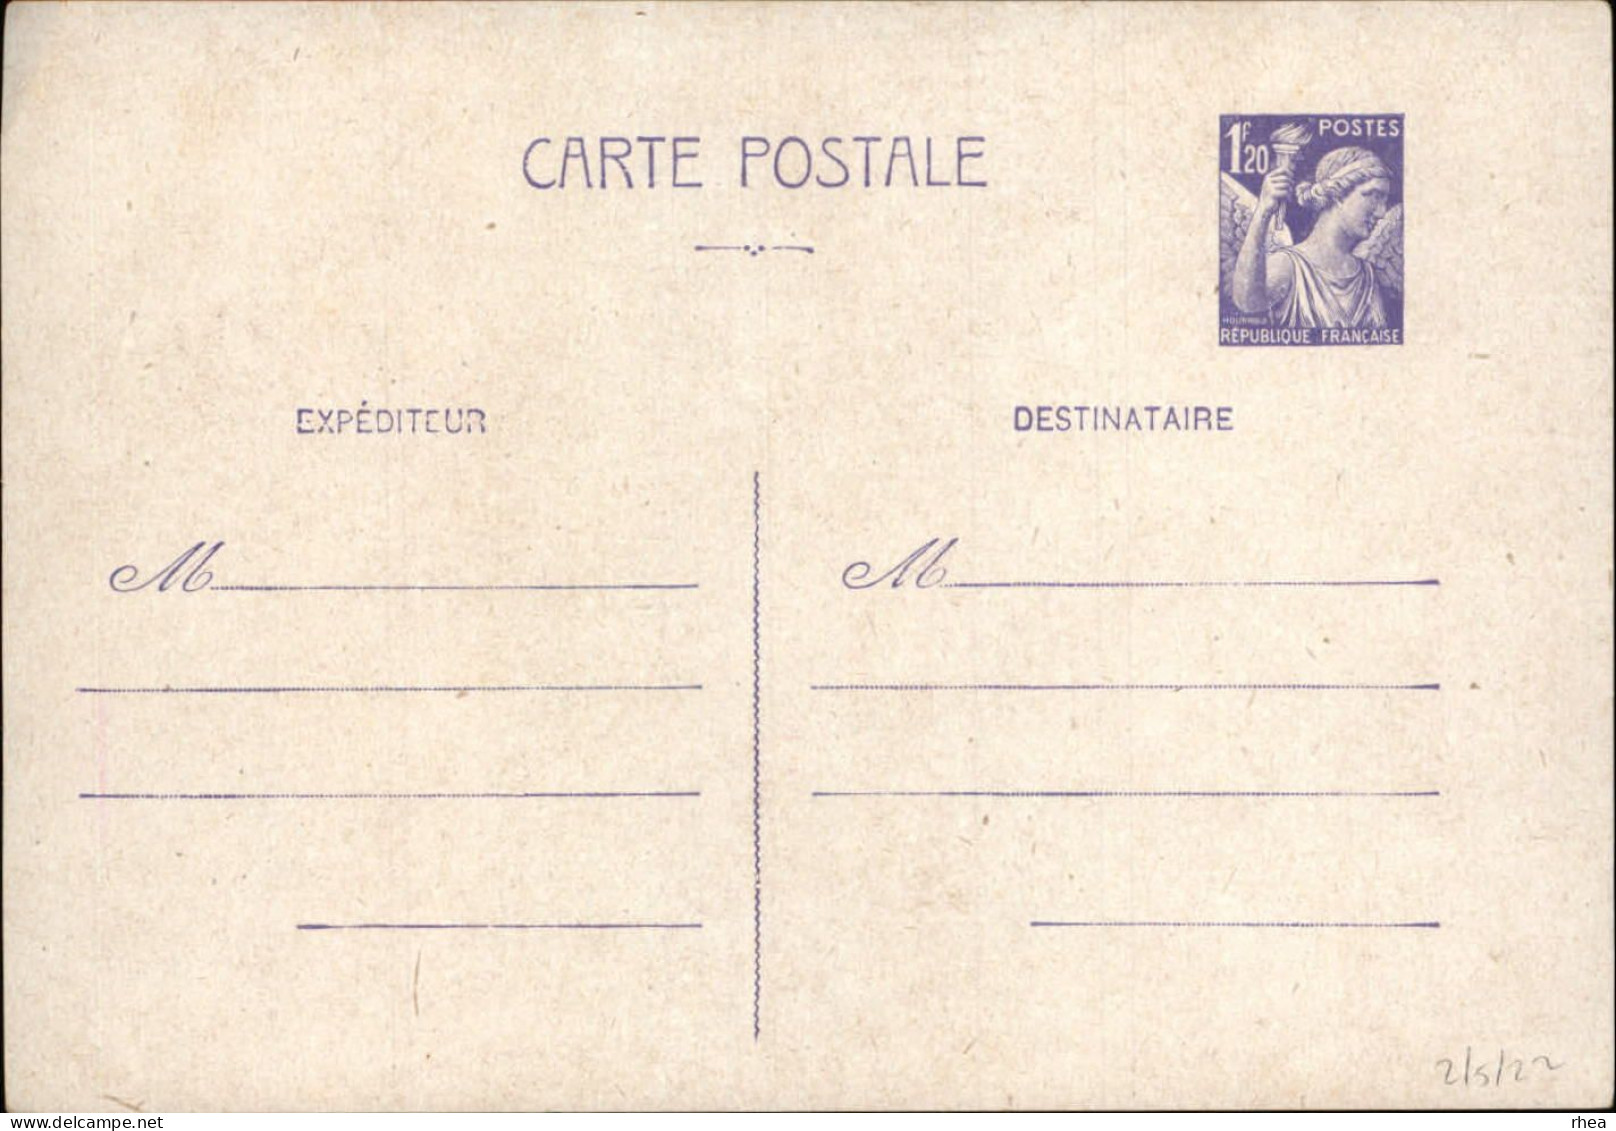 CARTE POSTALE - ENTIER POSTAL - Marianne 1.20 F - Standard Covers & Stamped On Demand (before 1995)